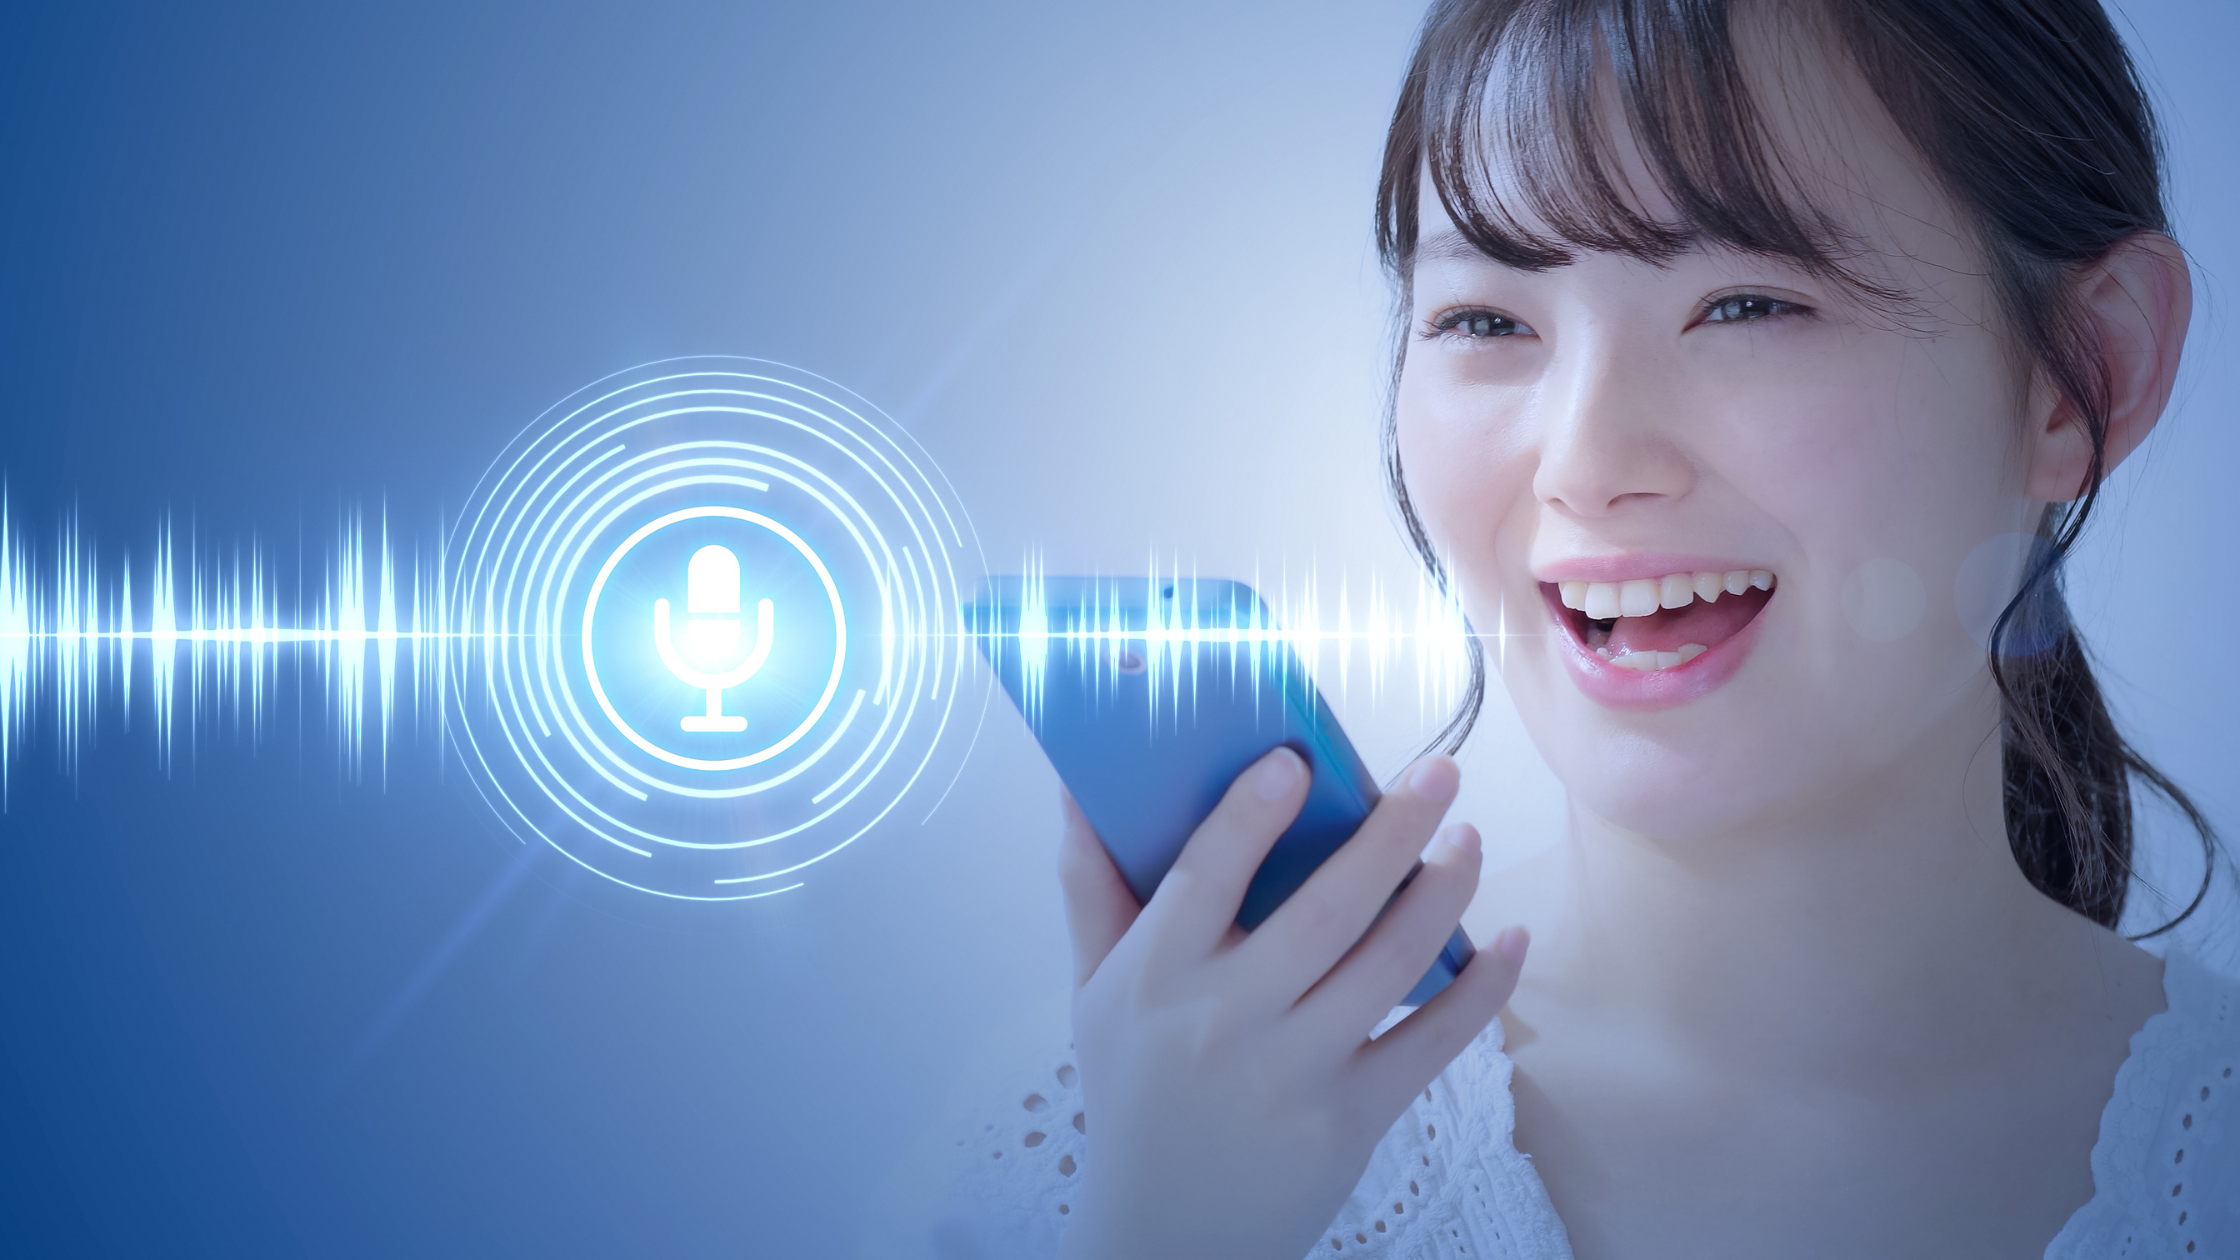 A person holding their phone up to their mouth with an overlay of a microphone and voice soundwaves in blue